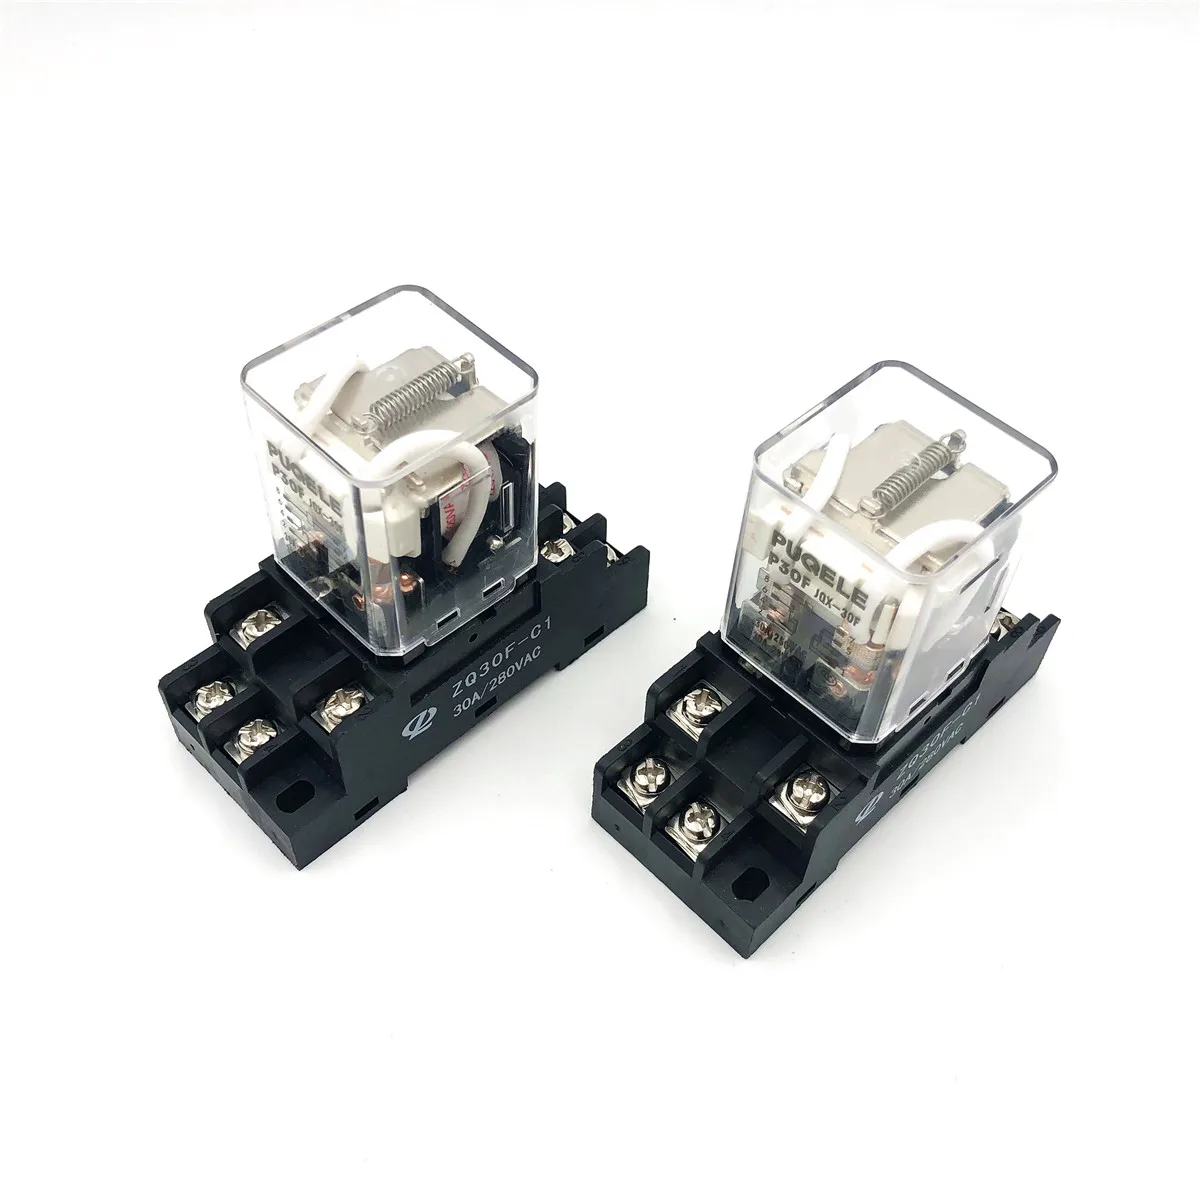 

2sets JQX-30F 2Z 30A High Power Relay DC12V DC24V AC110V AC220V Intermediate Relays P30F 8-Pin DPDT 2NO 2NC with Socket Base